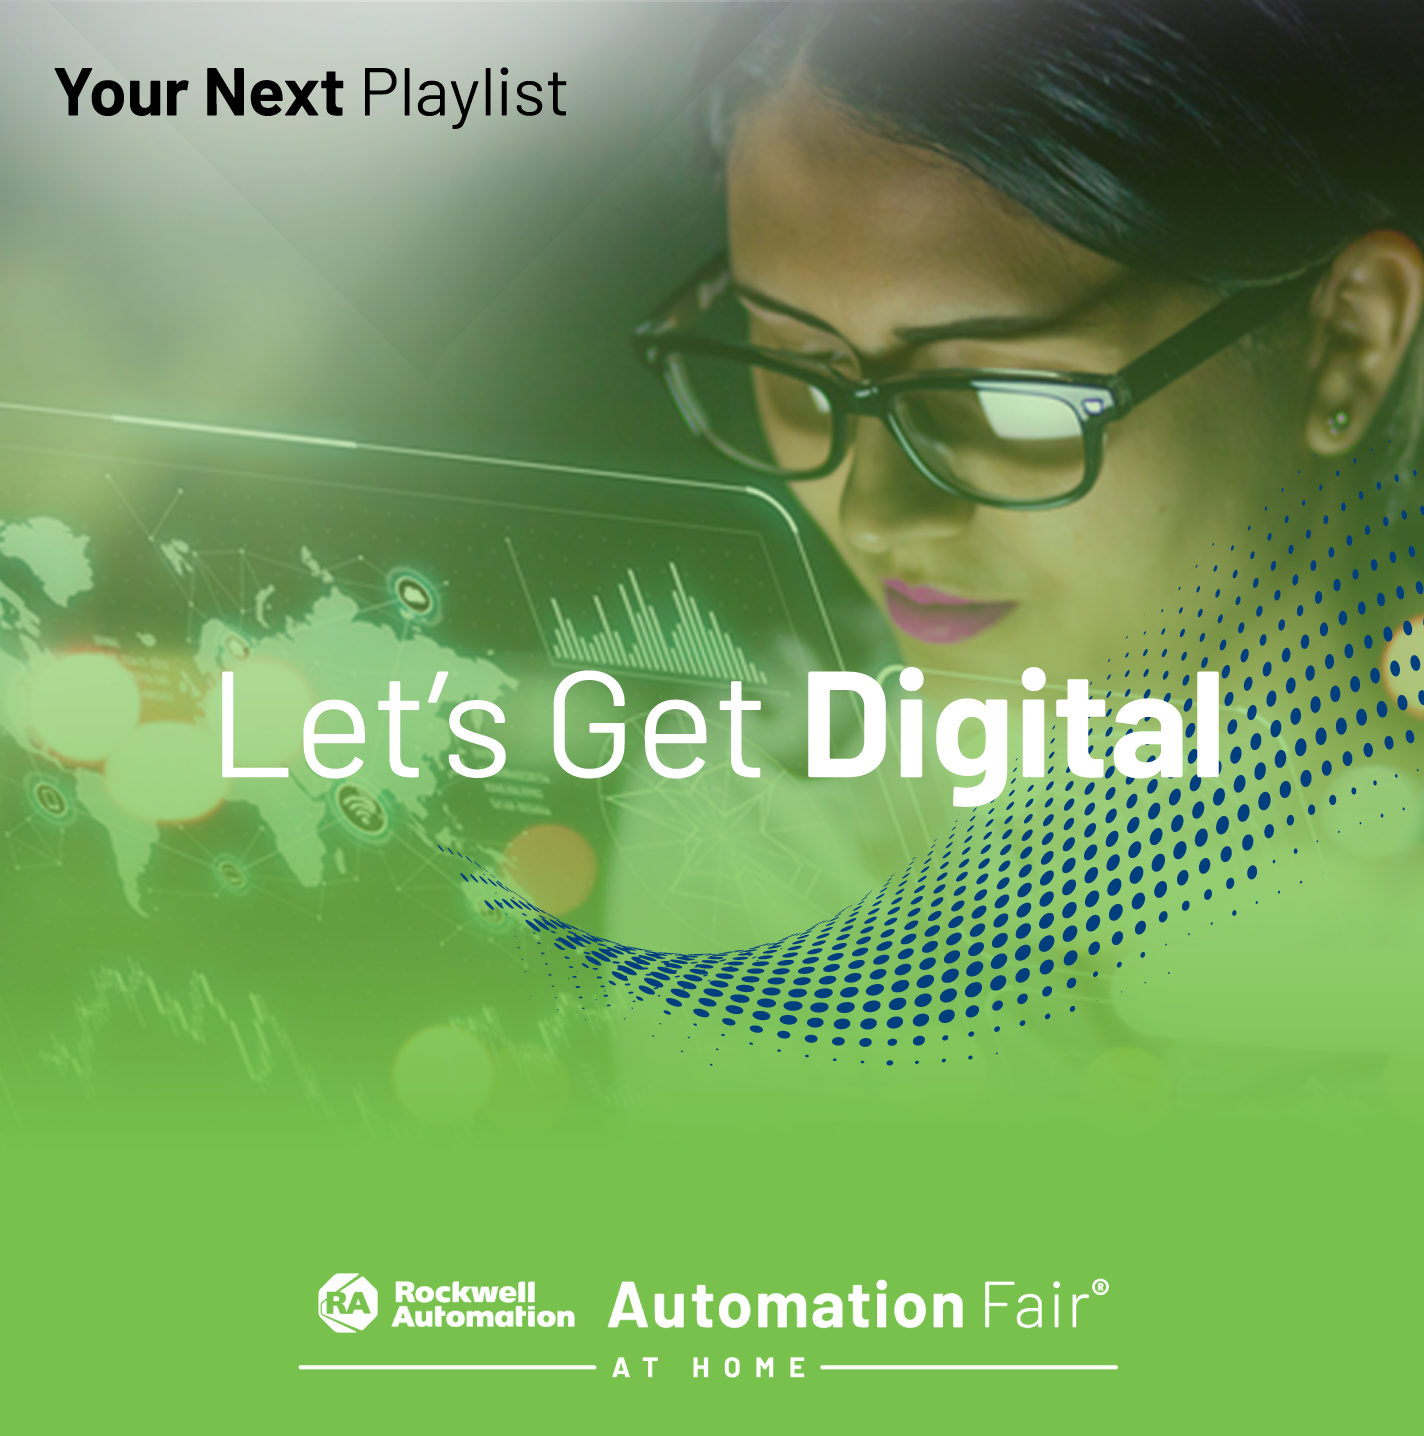 Digital Strategists webinar playlist featuring the top digital transformation sessions from Automation Fair® At Home.